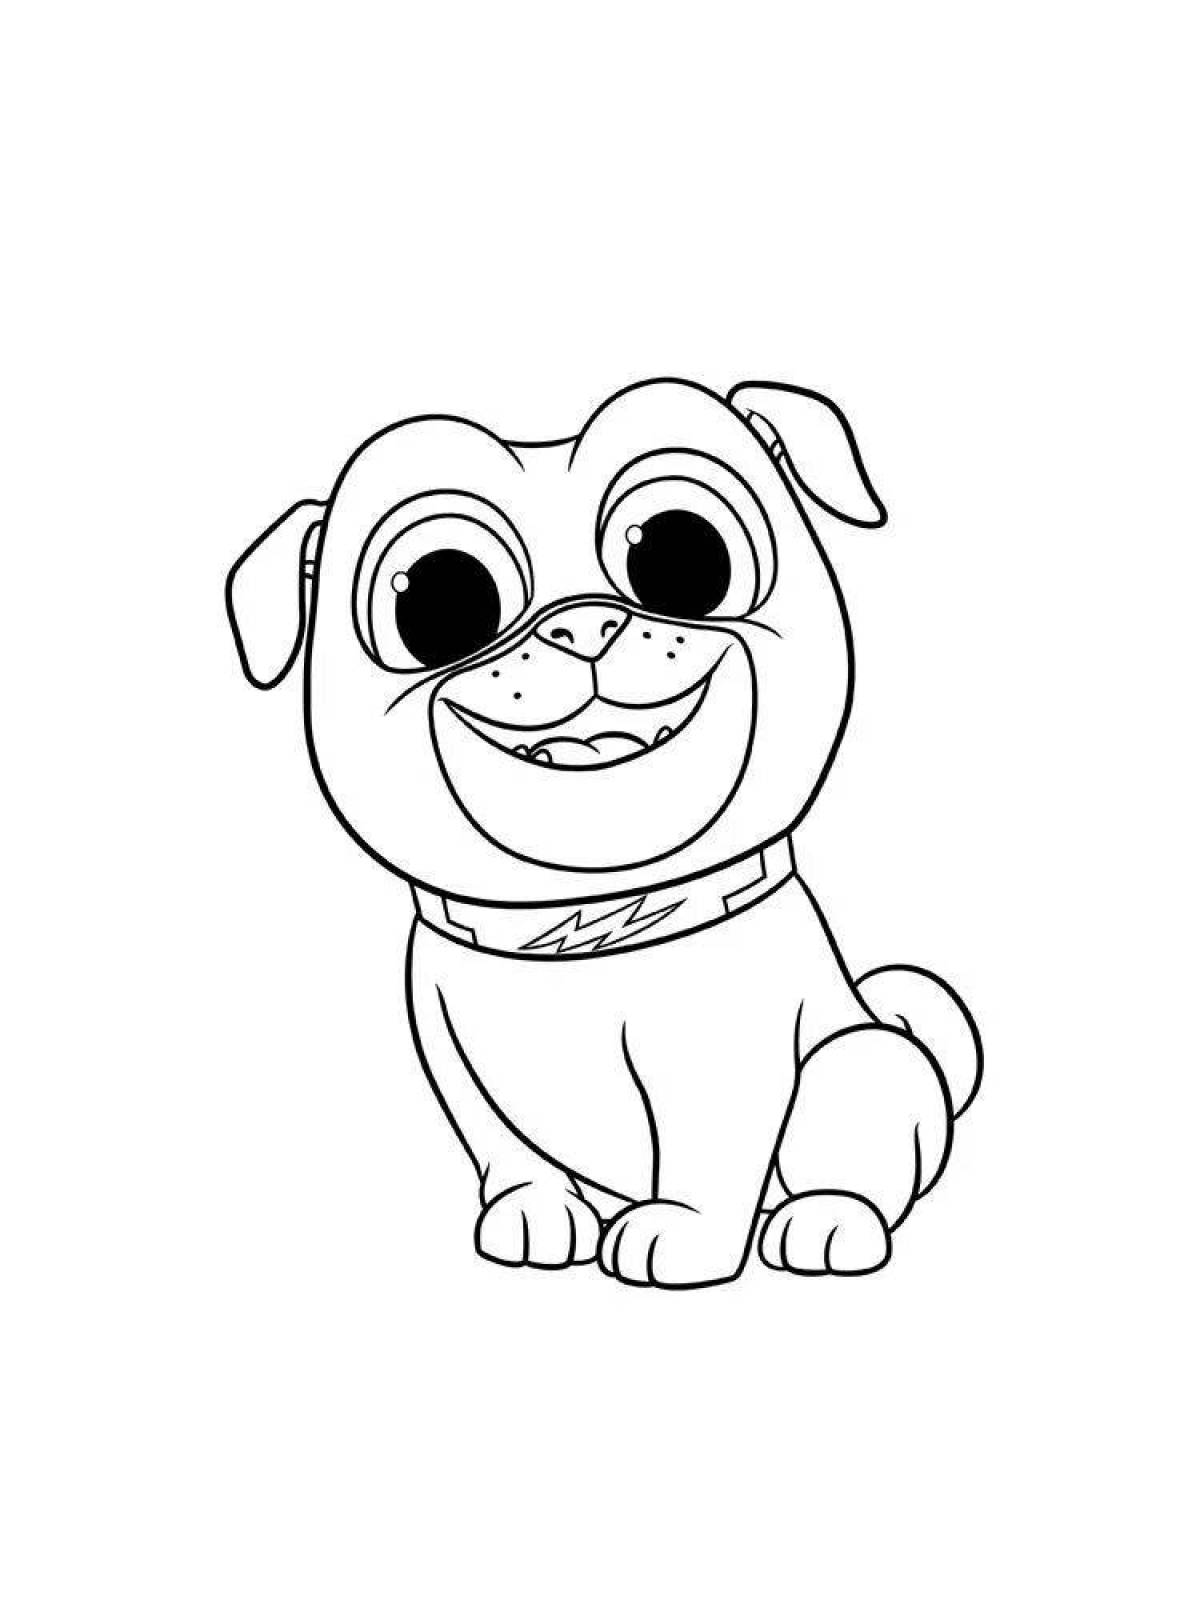 Fun bingo and roles coloring page